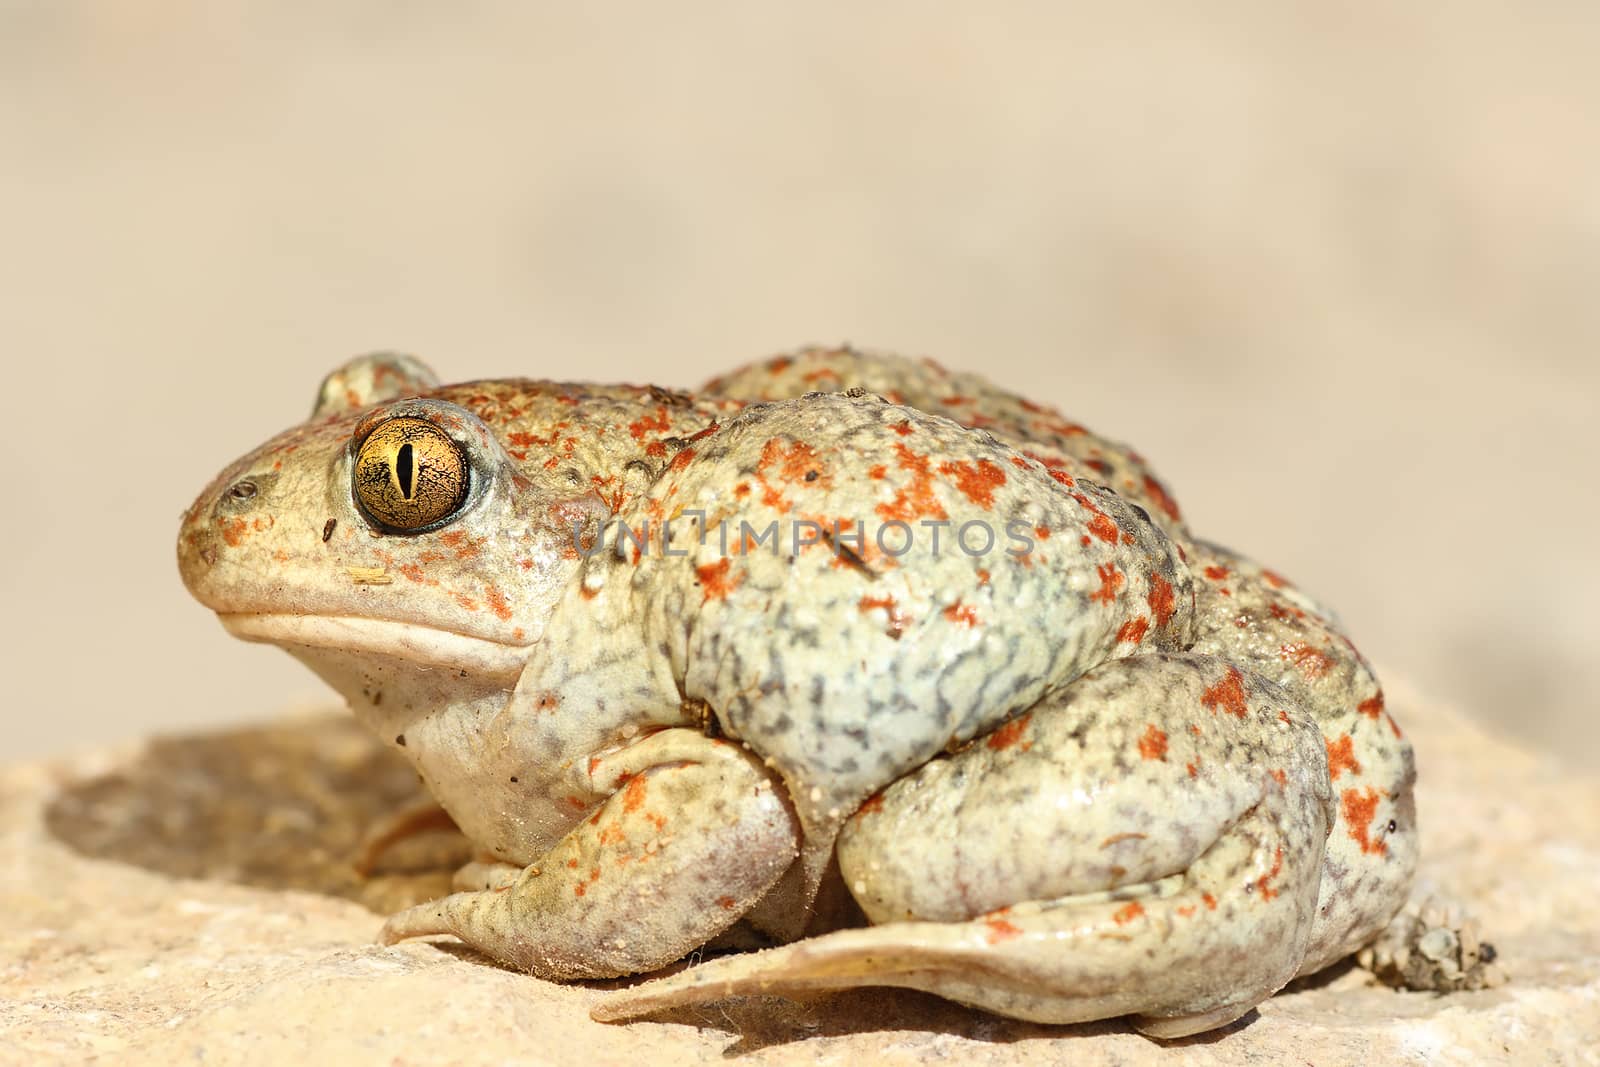 colorful garlic toad standing on the ground ( Pelobates fuscus )